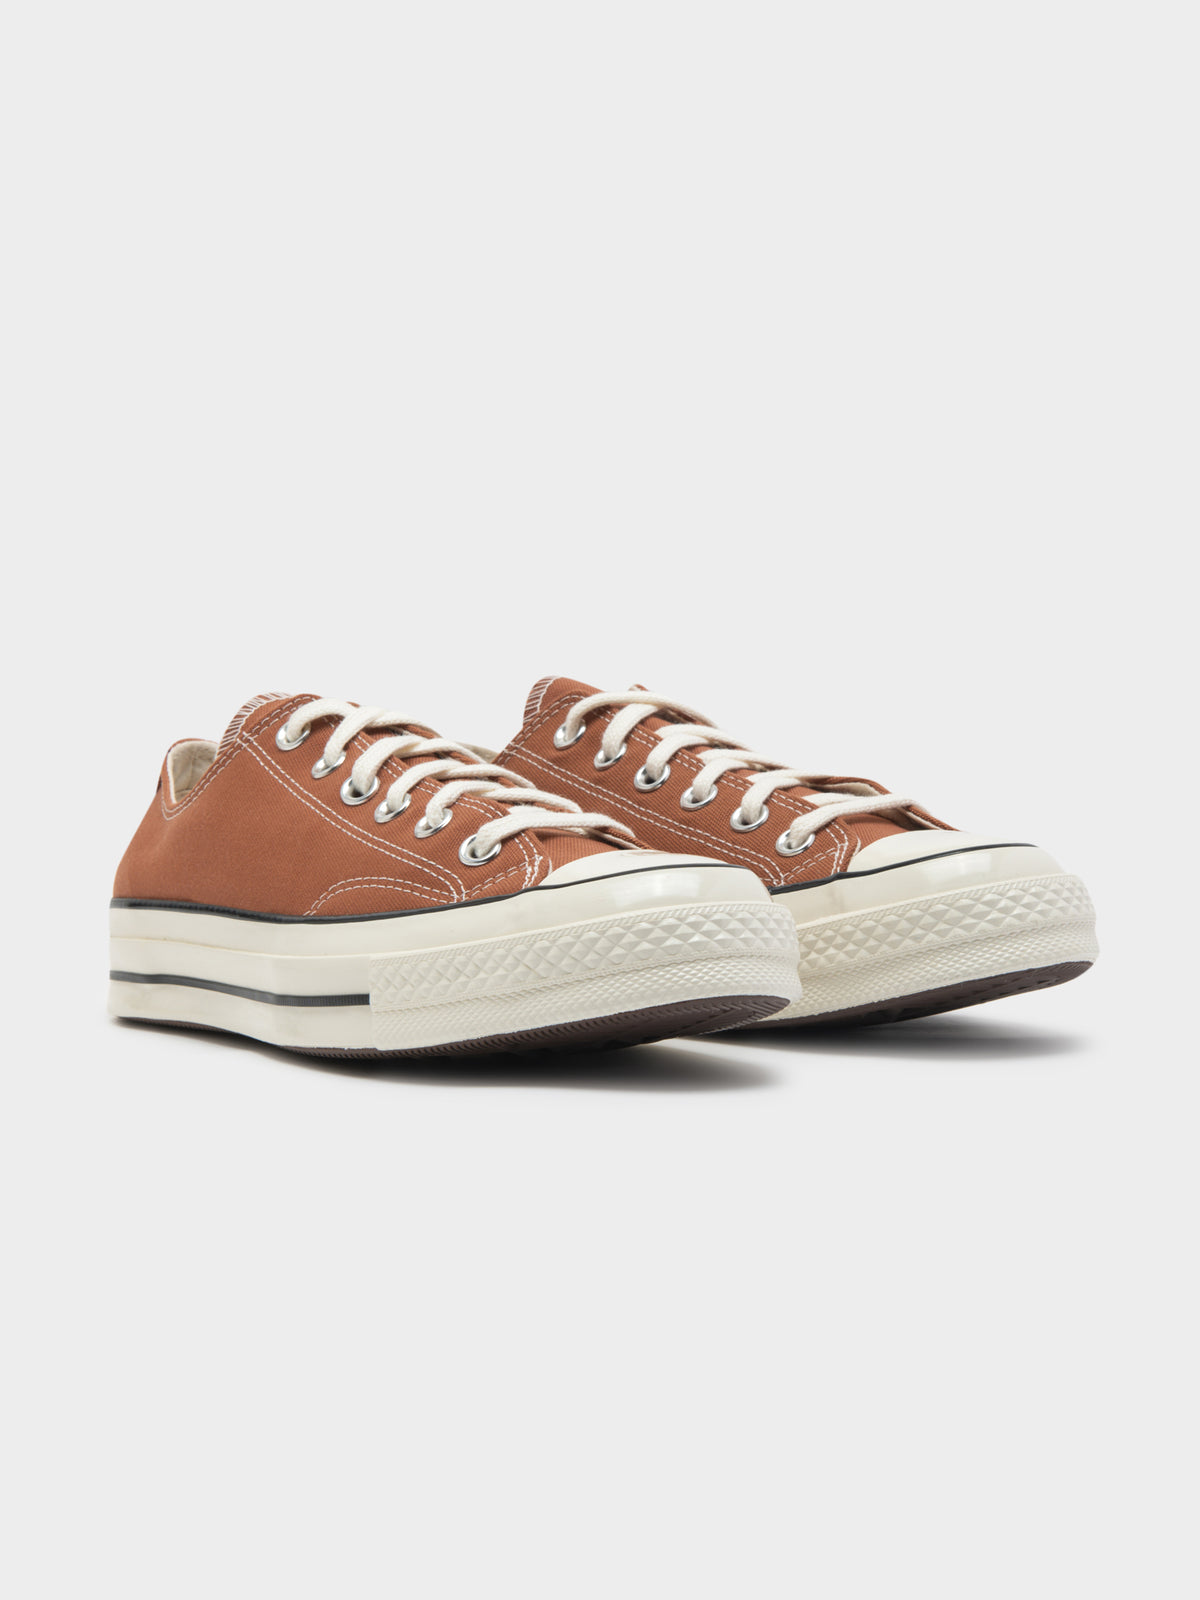 Unisex Chuck 70 Low Sneakers in Mineral Clay Brown